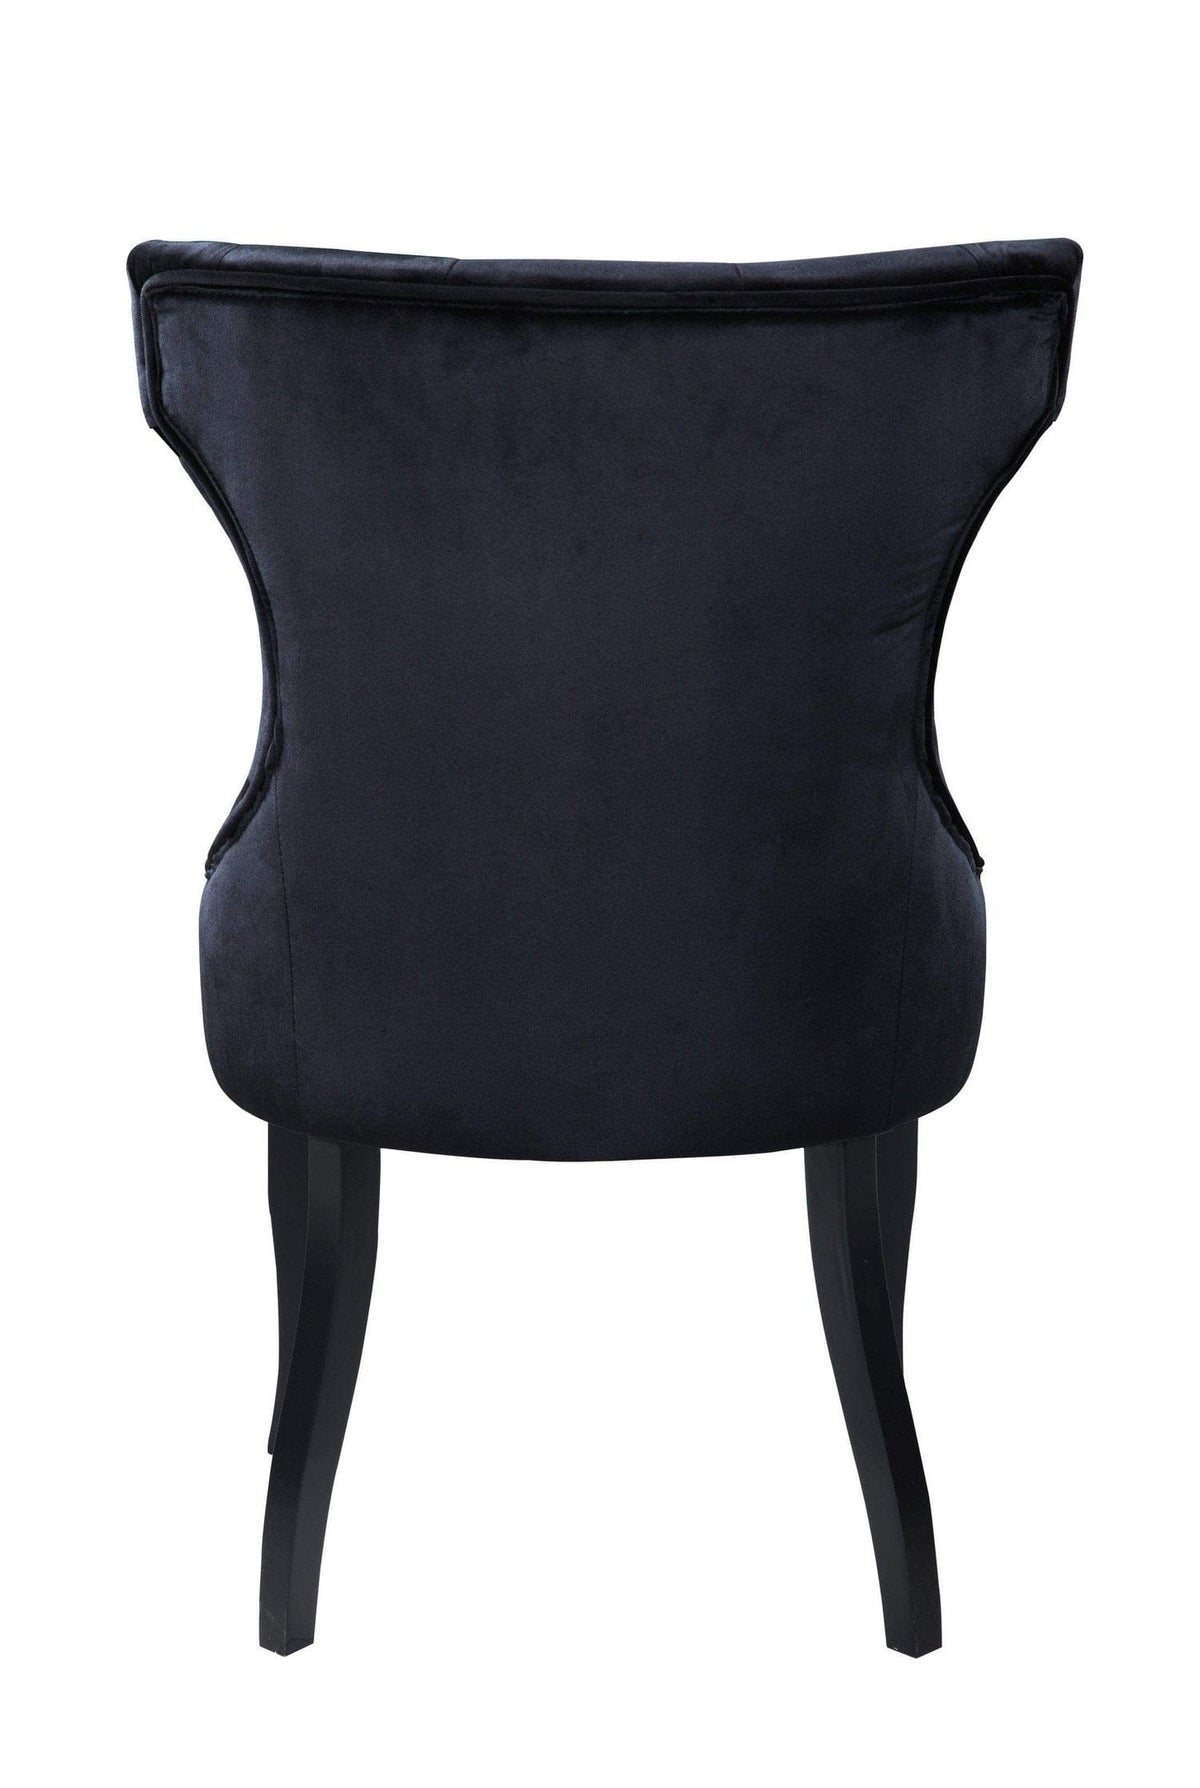 Iconic Home Naomi Tufted Velvet Dining Chair Set of 2 